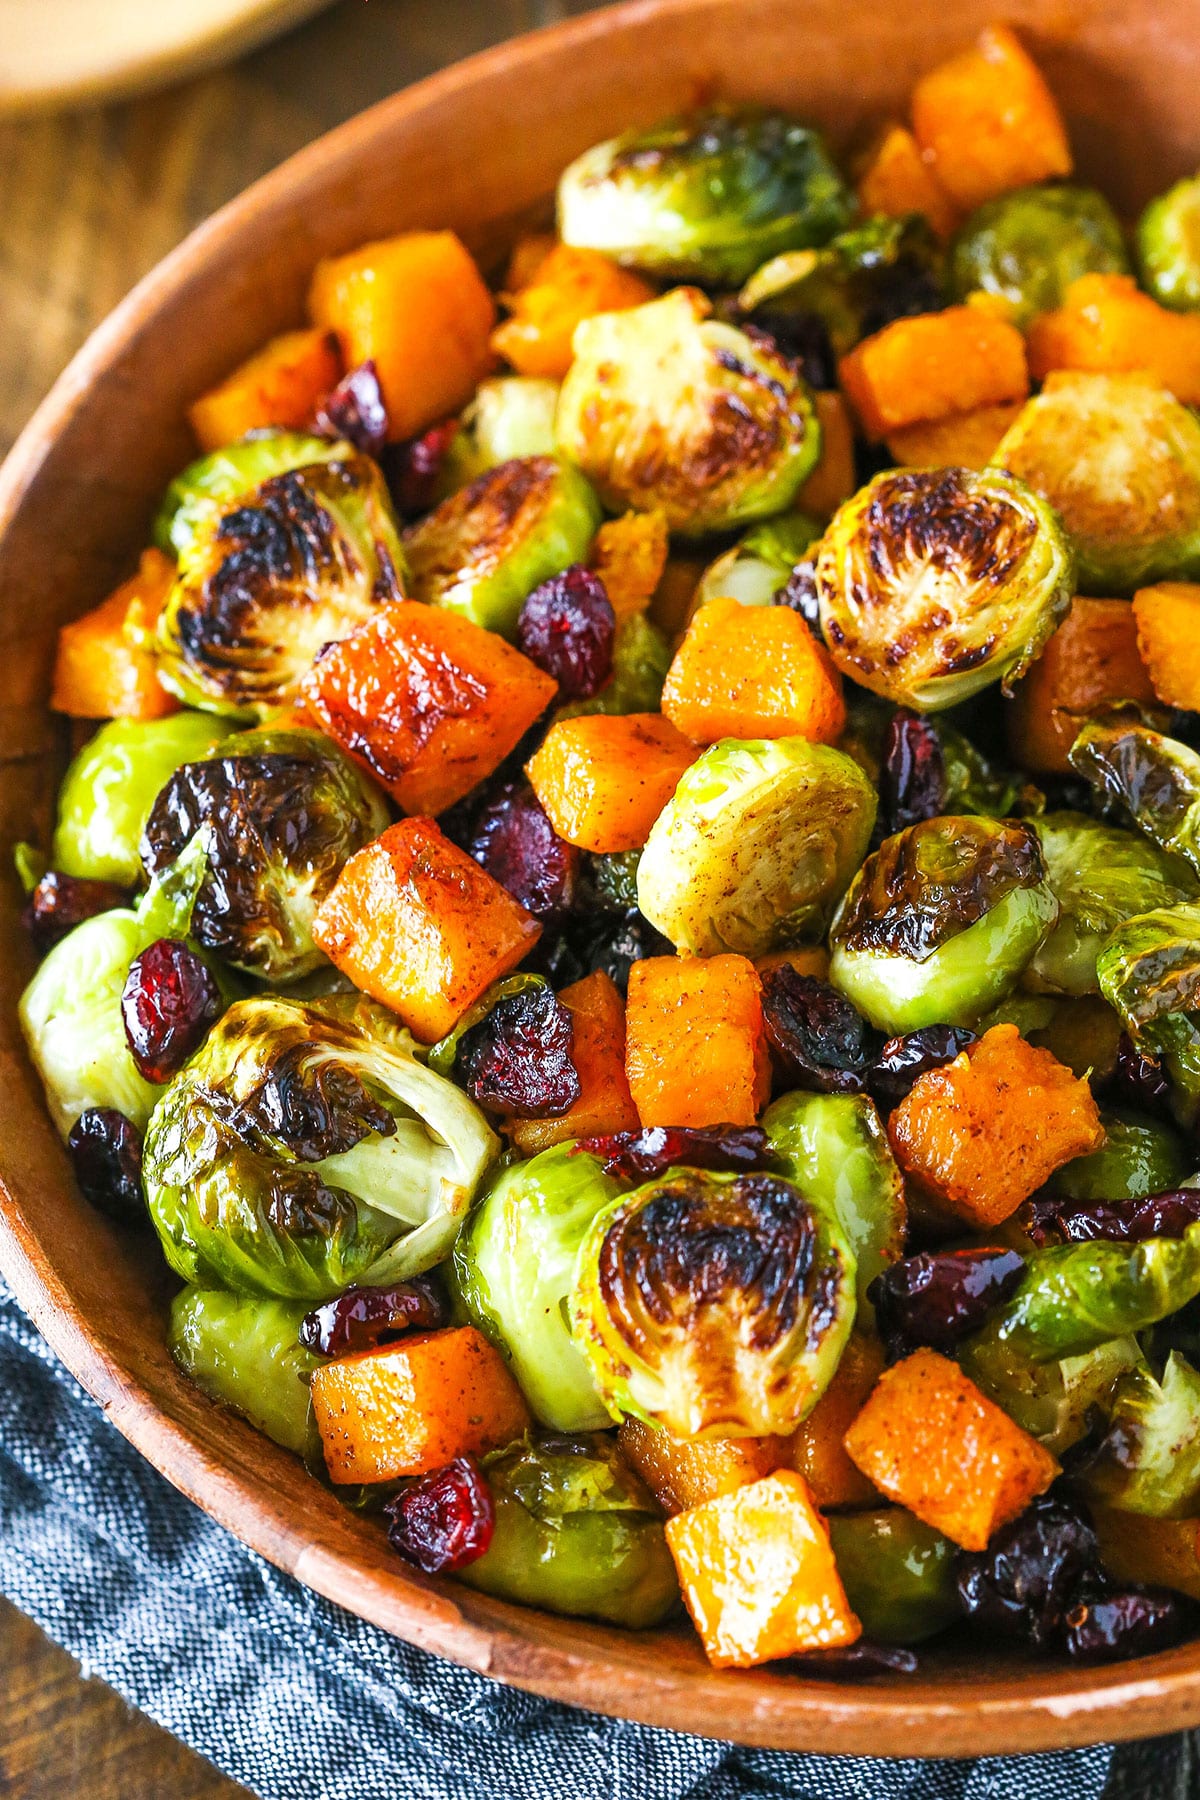 Honey Roasted Brussels Sprouts with Butternut Squash and Cranberries in a wooden serving dish